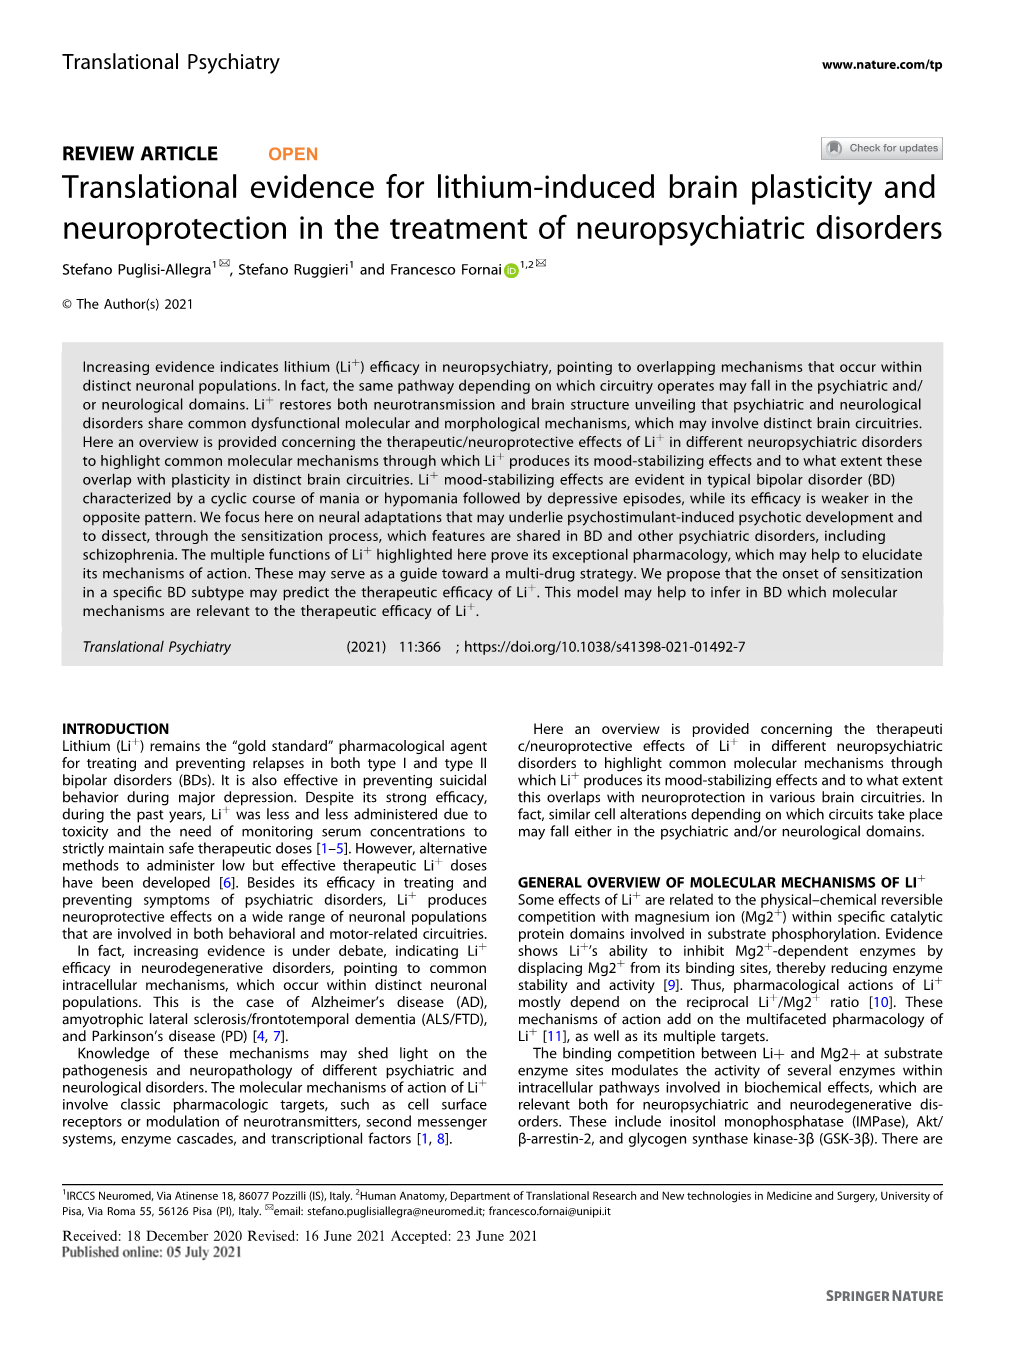 Translational Evidence for Lithium-Induced Brain Plasticity And